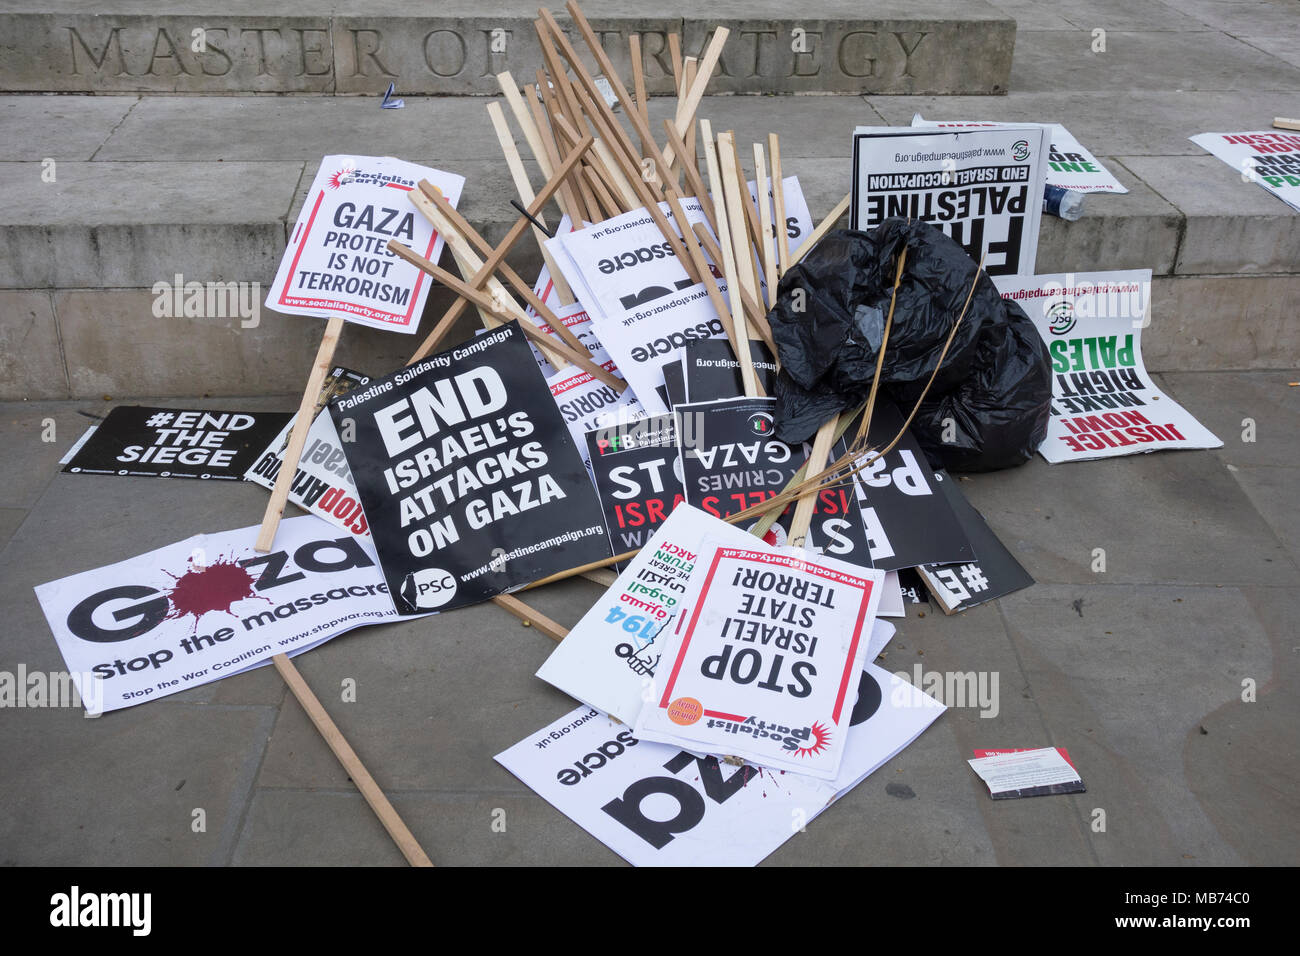 London, England, UK.  7 April, 2018.  Protest for Gaza /Stop the Killing demonstration banners in Downing Street, London. Organised by Friends of Al-Aqsa, Palestine Solidarity Campaign, Palestinian Forum in Britain © Benjamin John/ Alamy Live News. Stock Photo